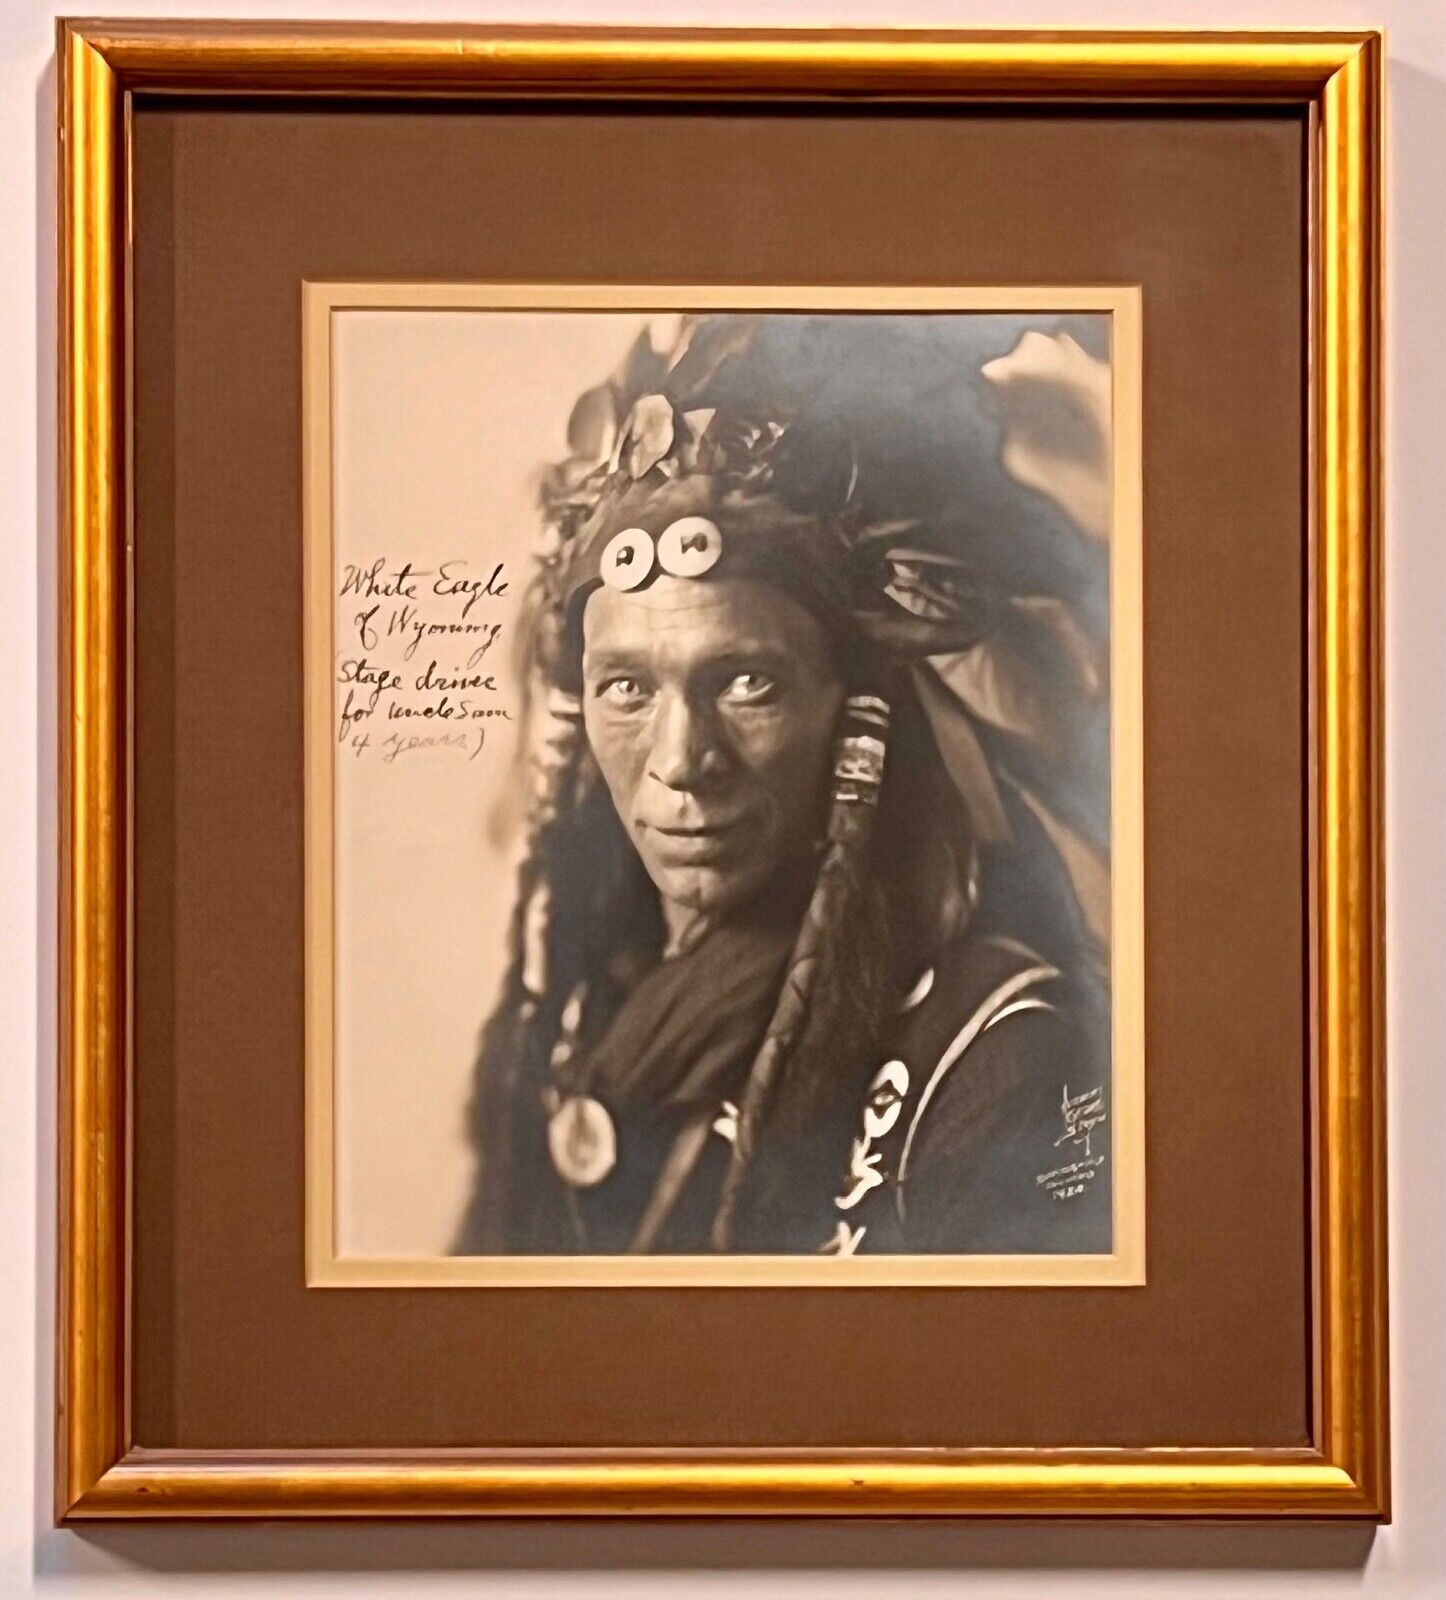 “White Eagle” of Wyoming; Stage Driver for Uncle Sam; Framed Photograph; 1924